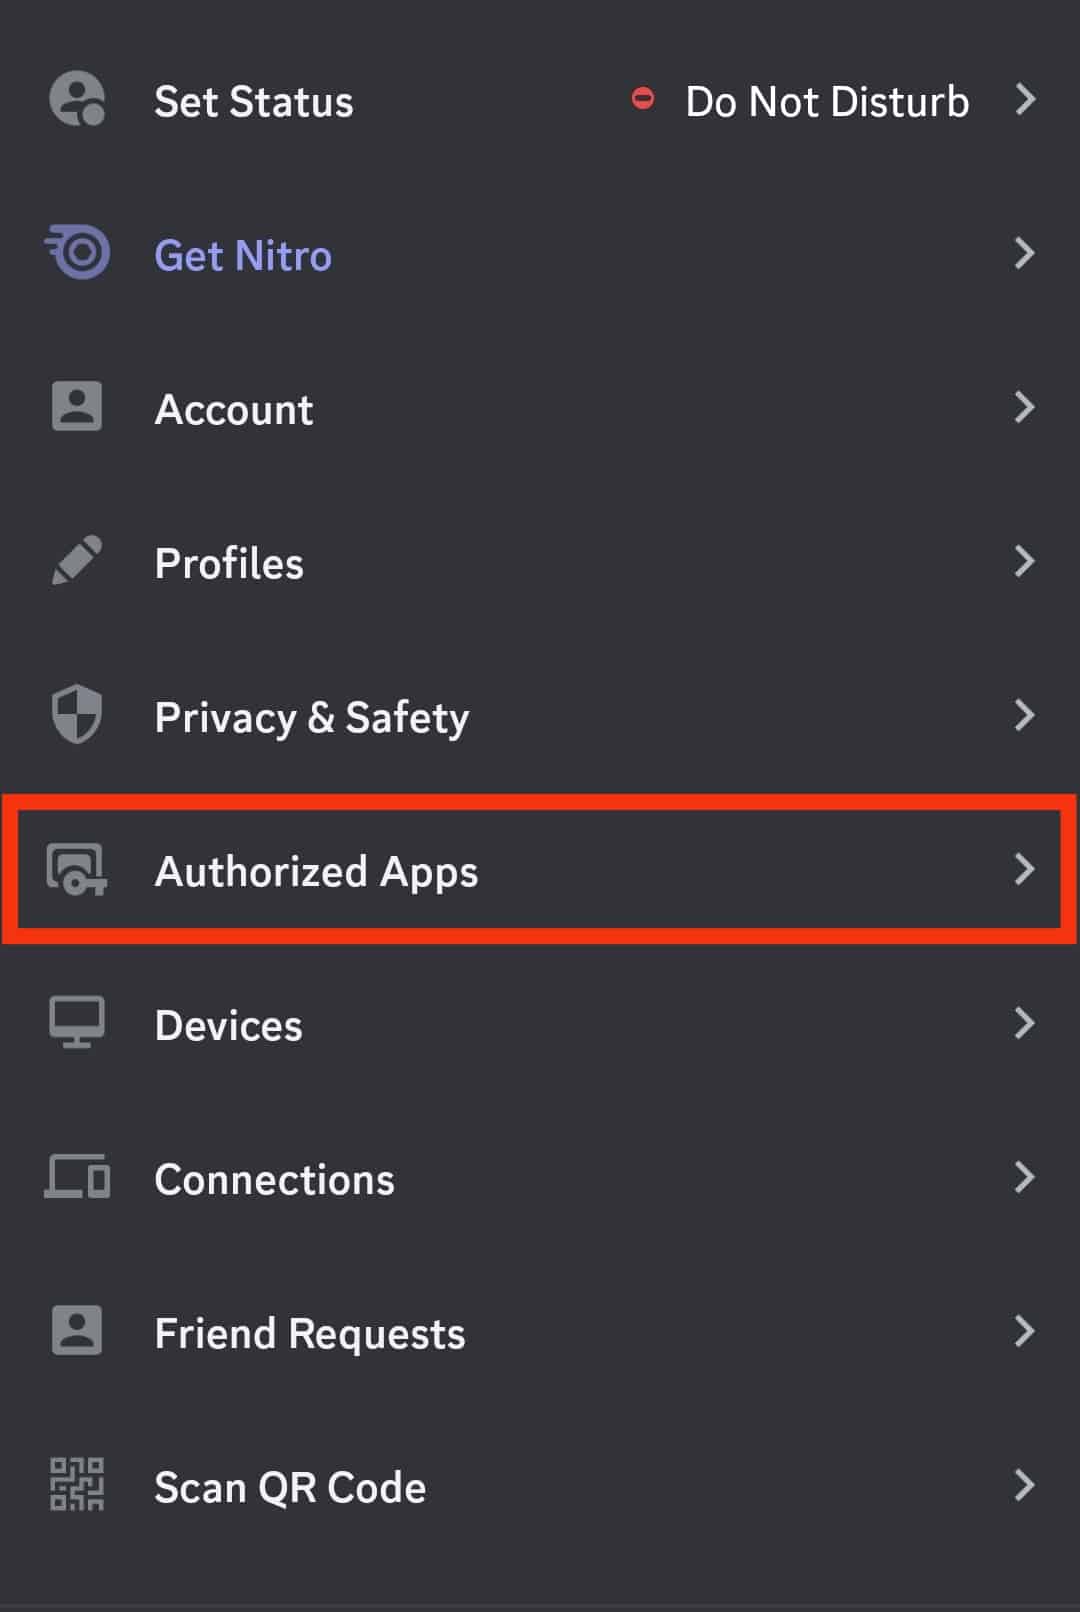 Tap On Authorized&Nbsp;Apps